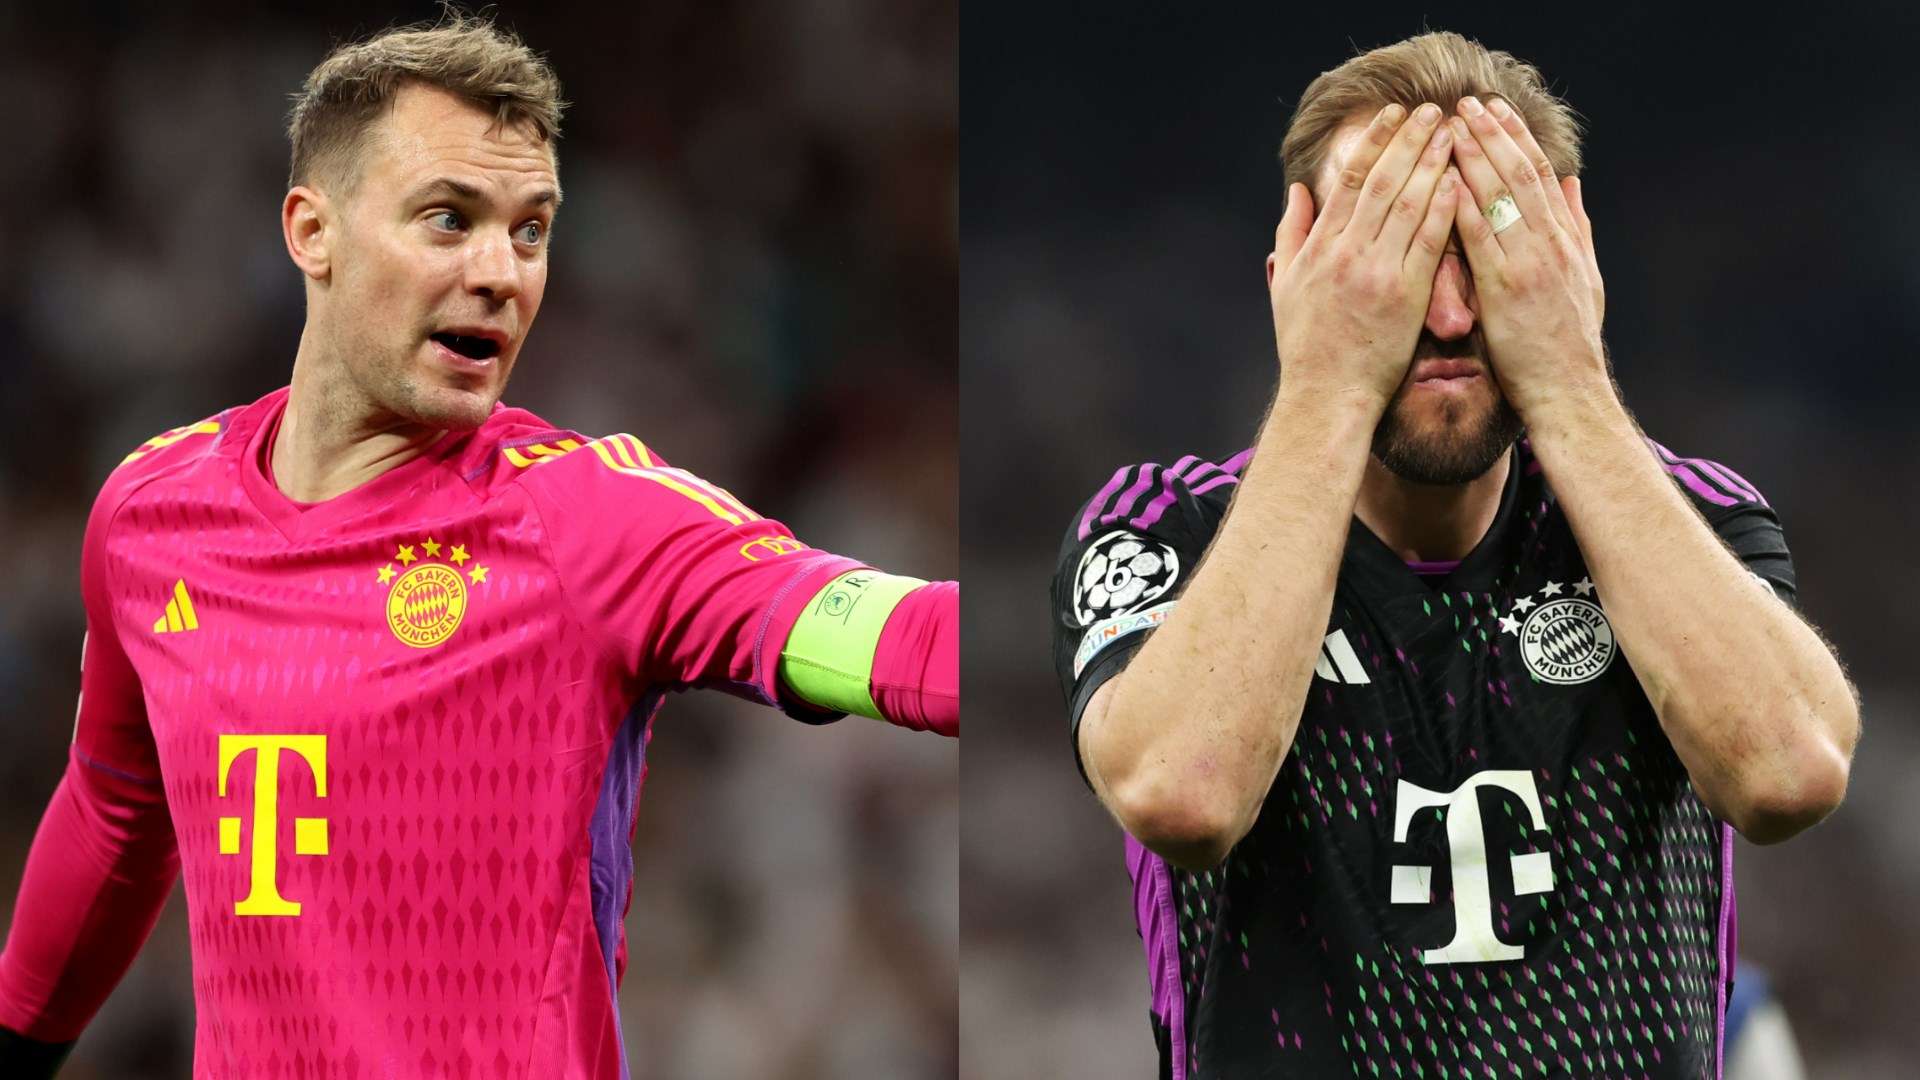 Bayern Munich player ratings vs Real Madrid: Manuel Neuer, what are you doing?! Goalkeeper goes from hero to zero as Harry Kane's Champions League dreams evaporate in devastating fashion | Goal.com